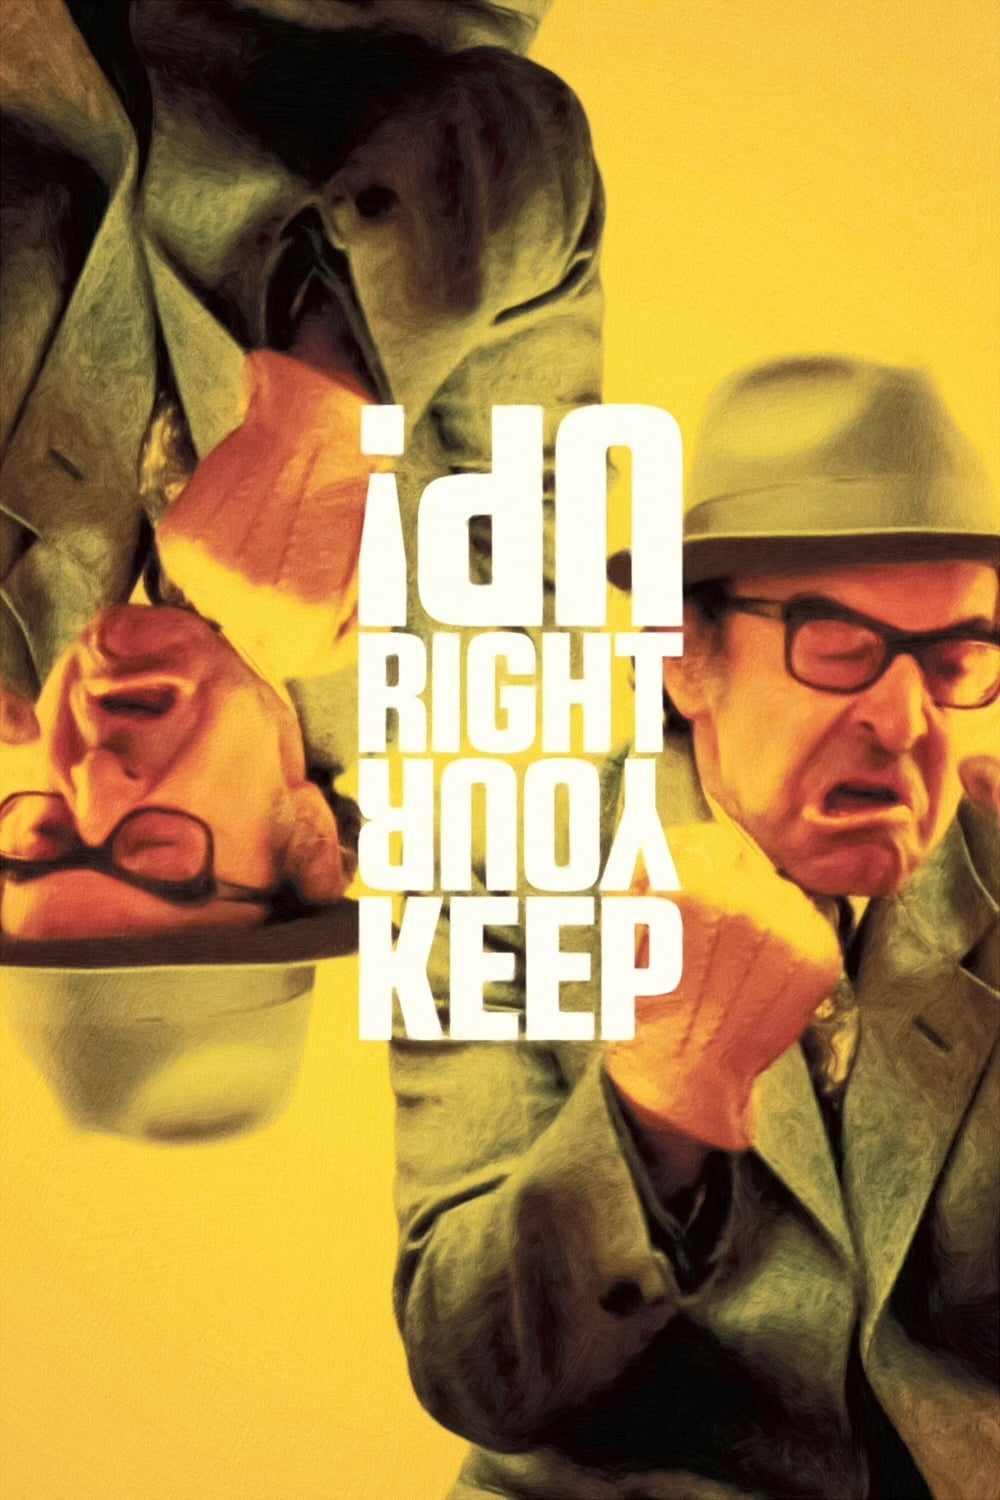 Keep Your Right Up (1987)